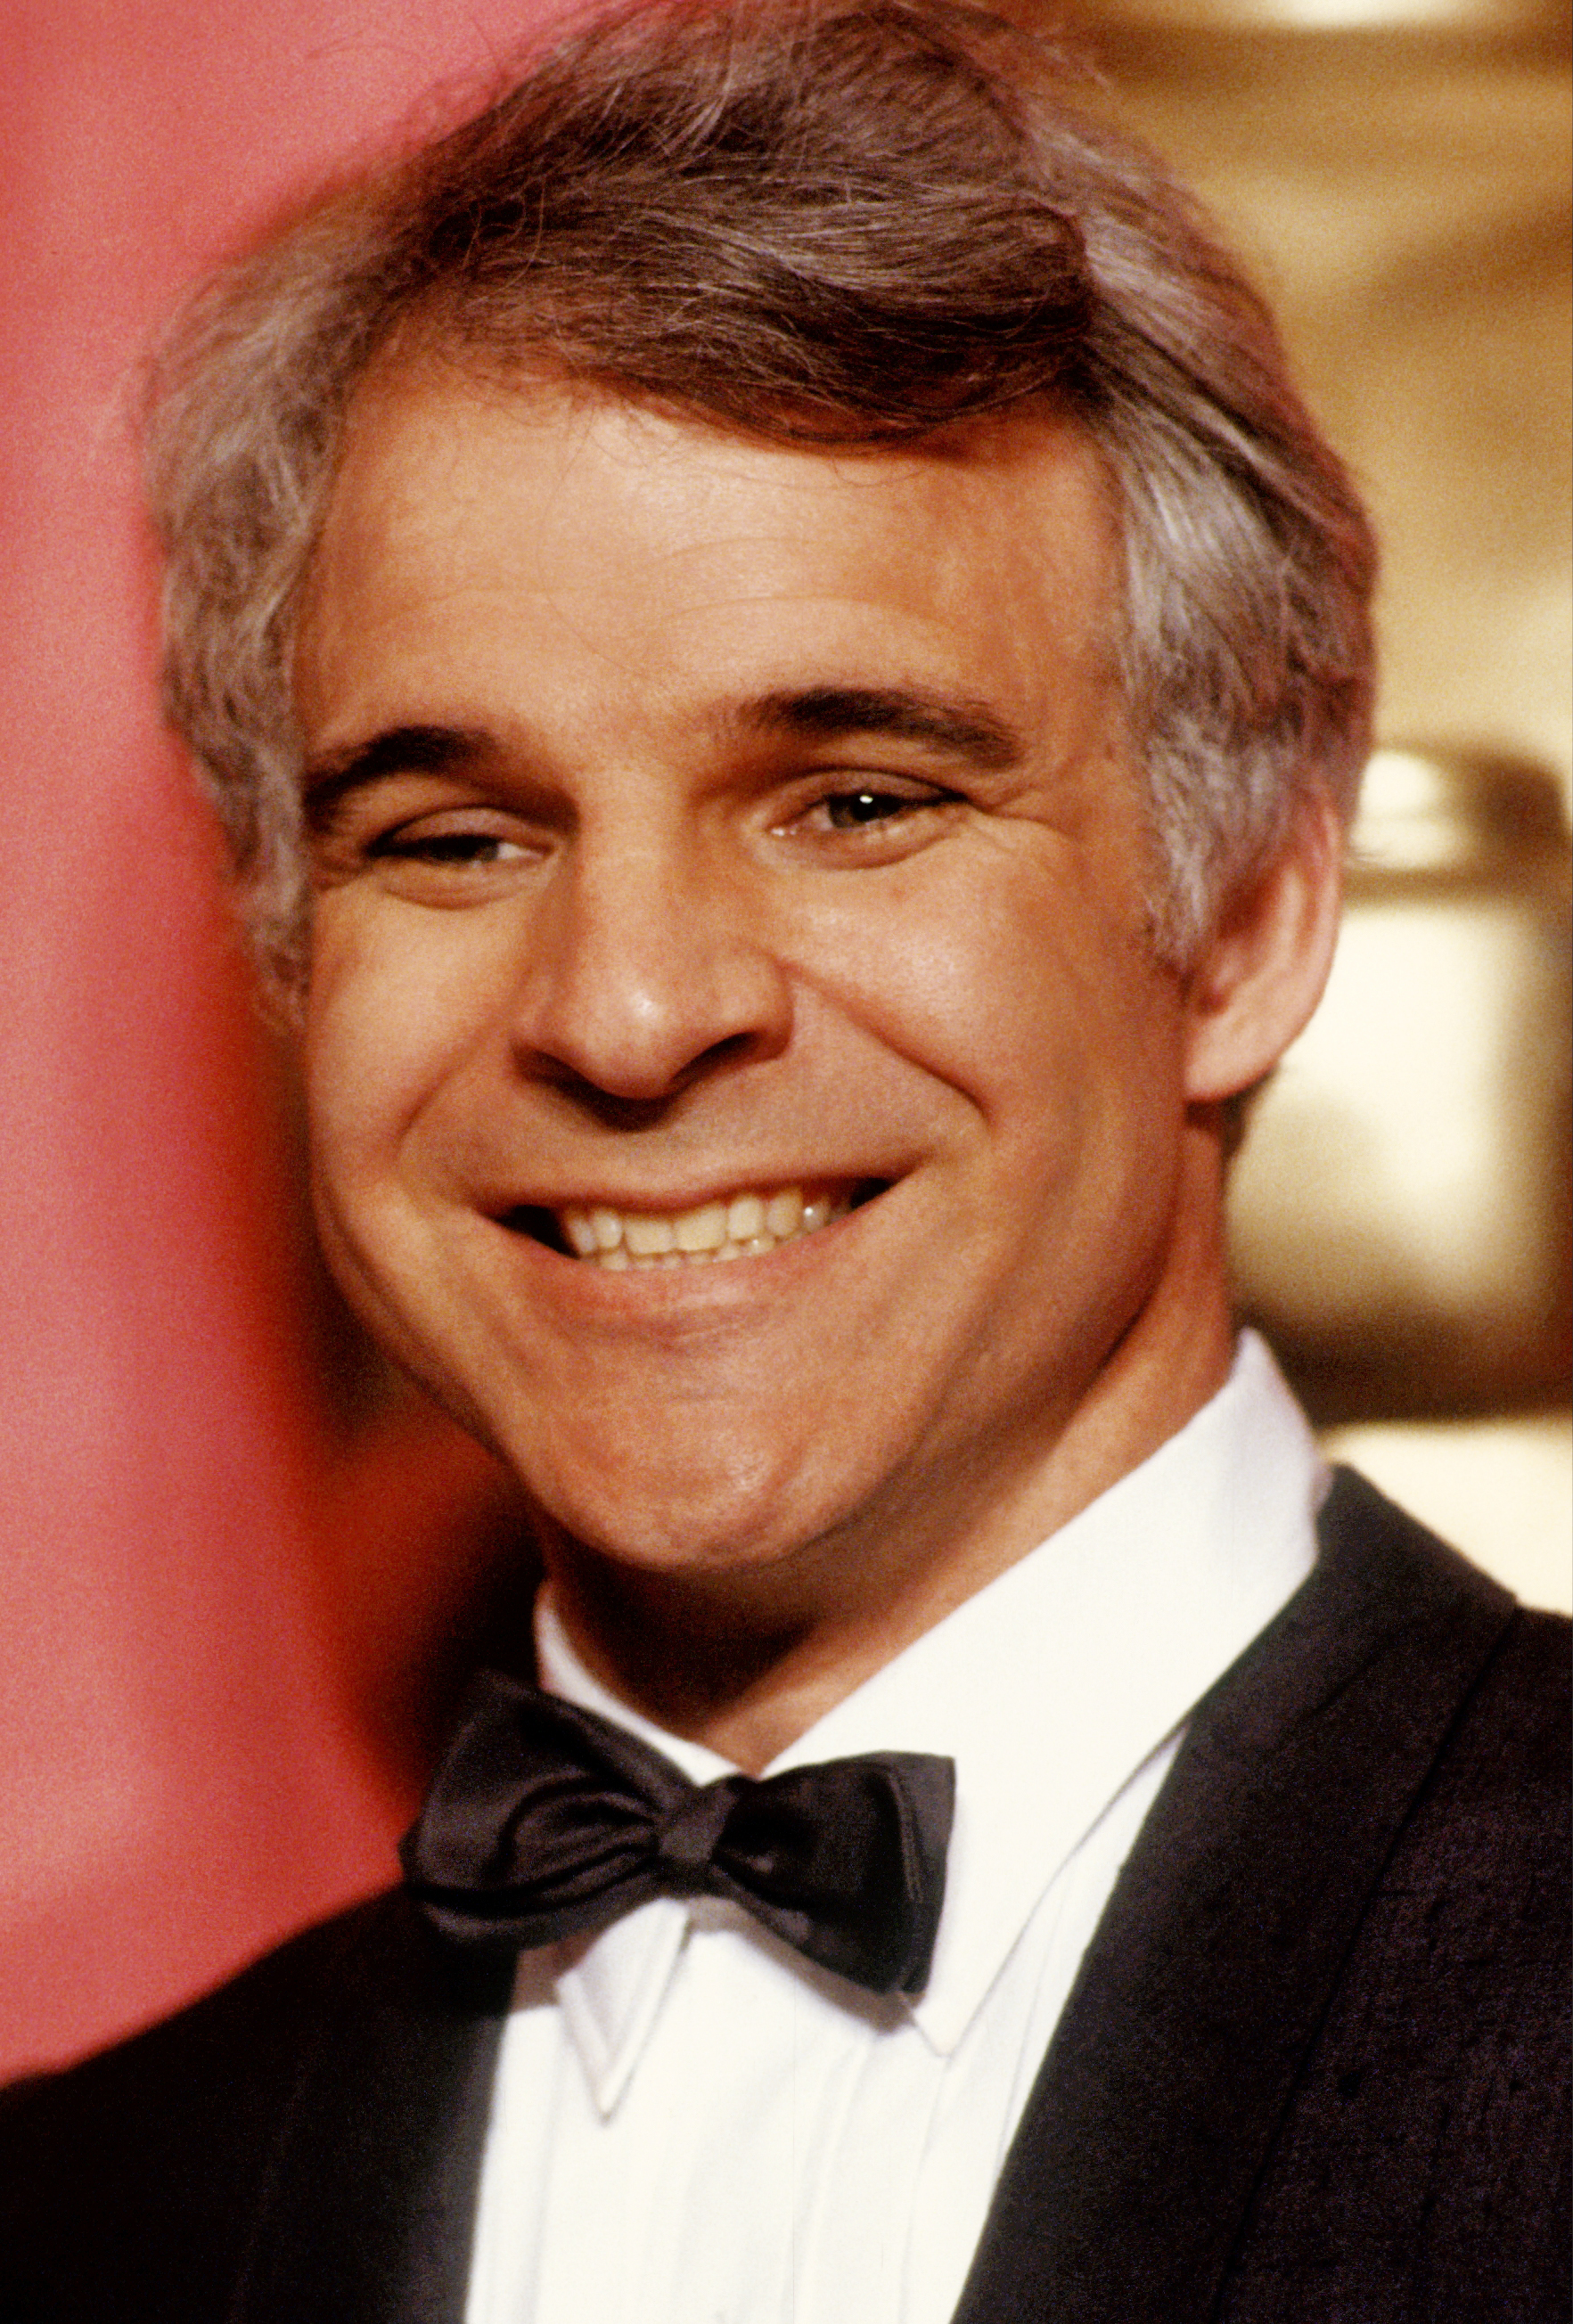 Steve Martin at the Academy Awards circa 1979 in Los Angeles | Source: Getty Images